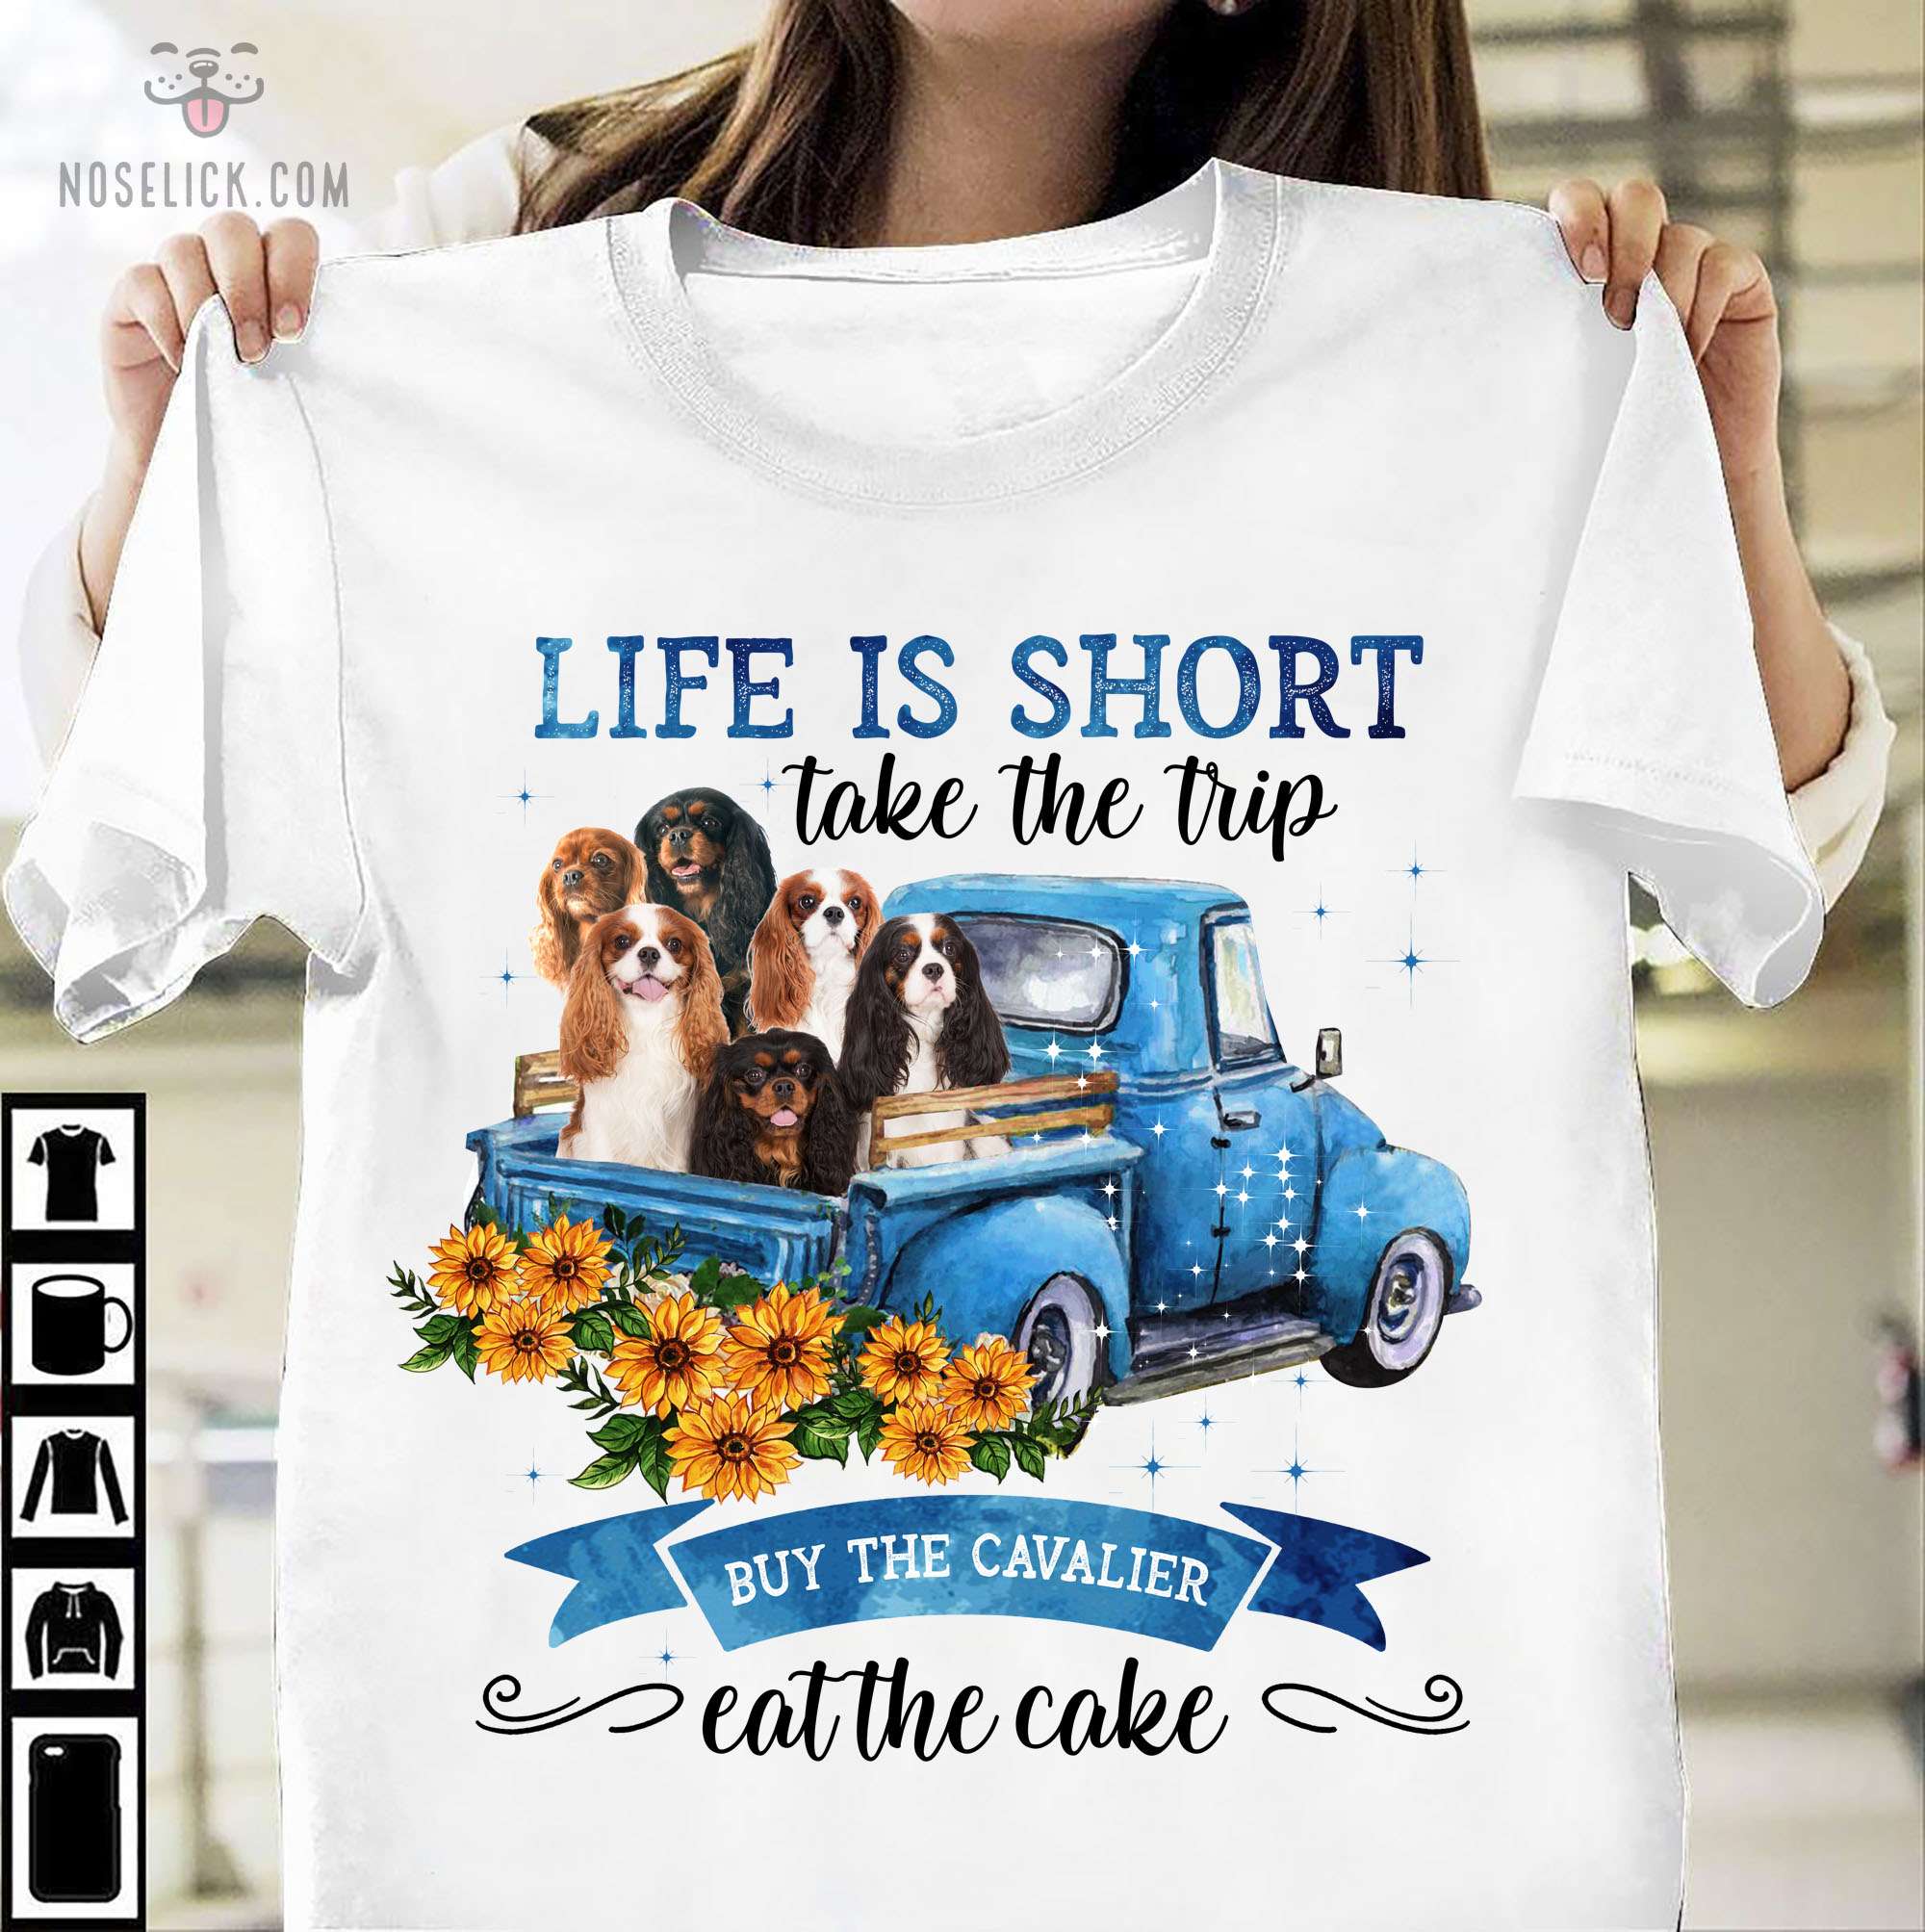 Life is short take the trip buy the Cavalier eat the cake - Cavalier on truck